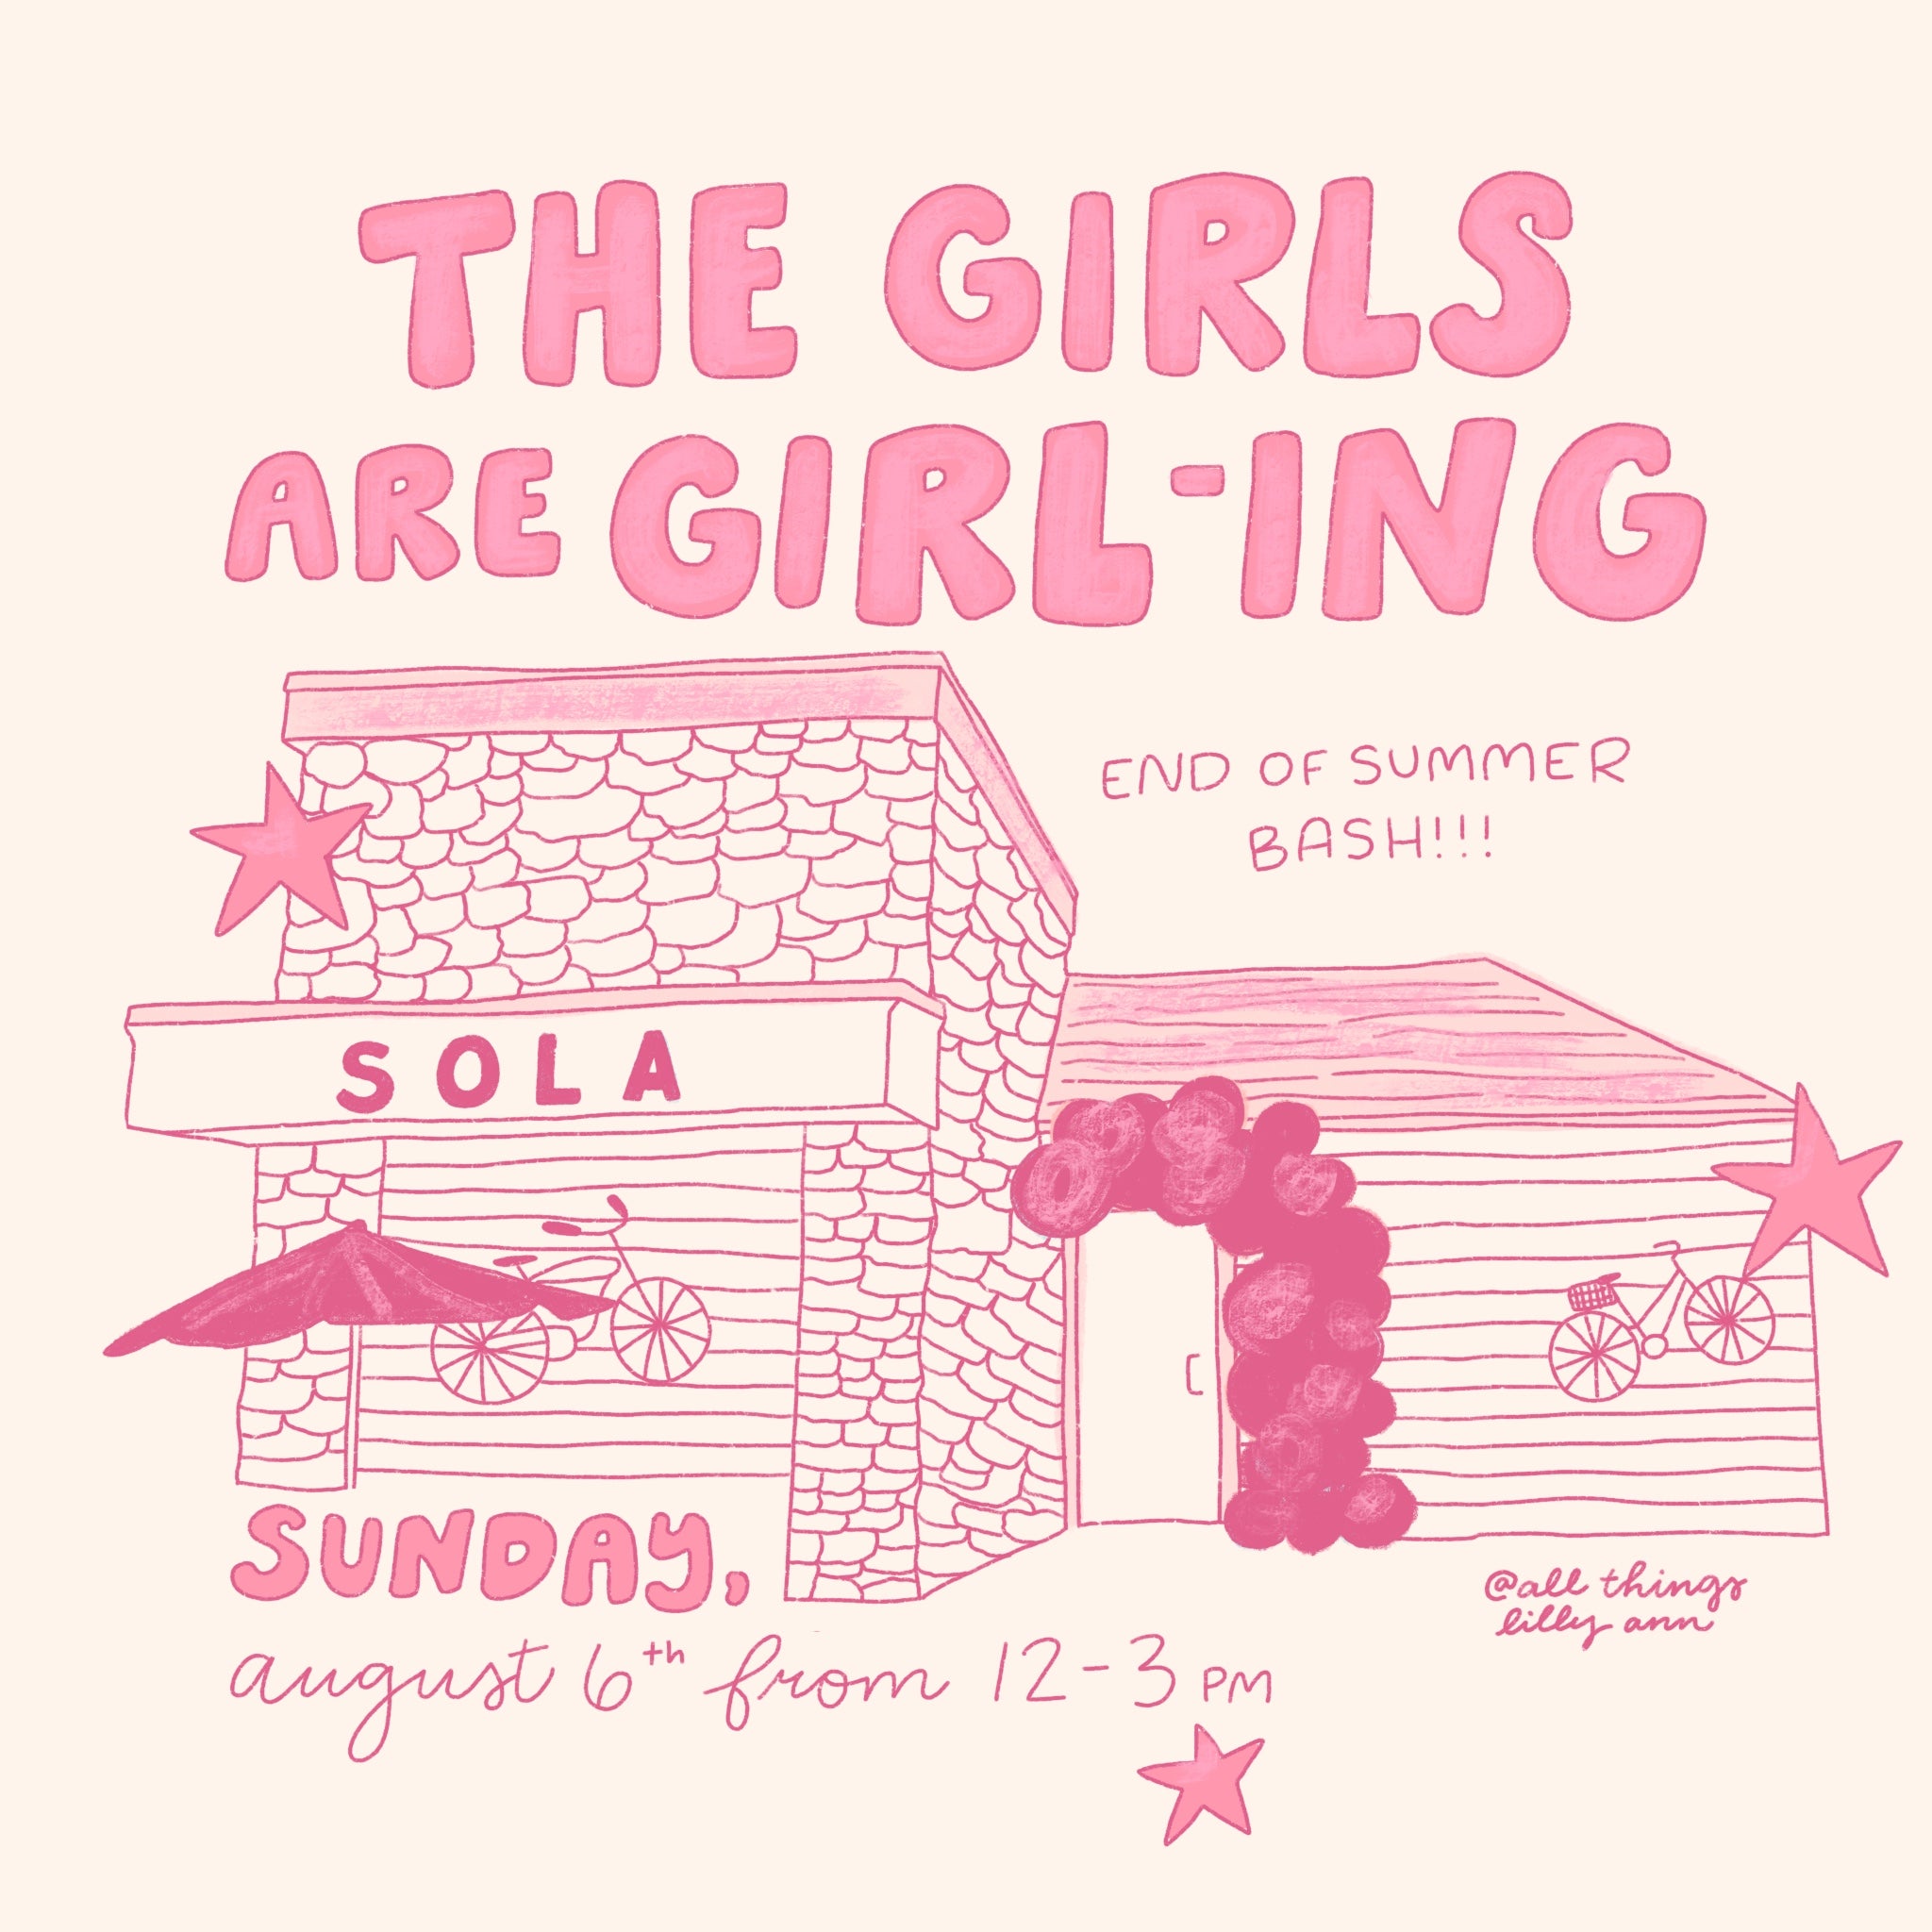 The Girls Are Girl-ing: End of Summer Bash Event!